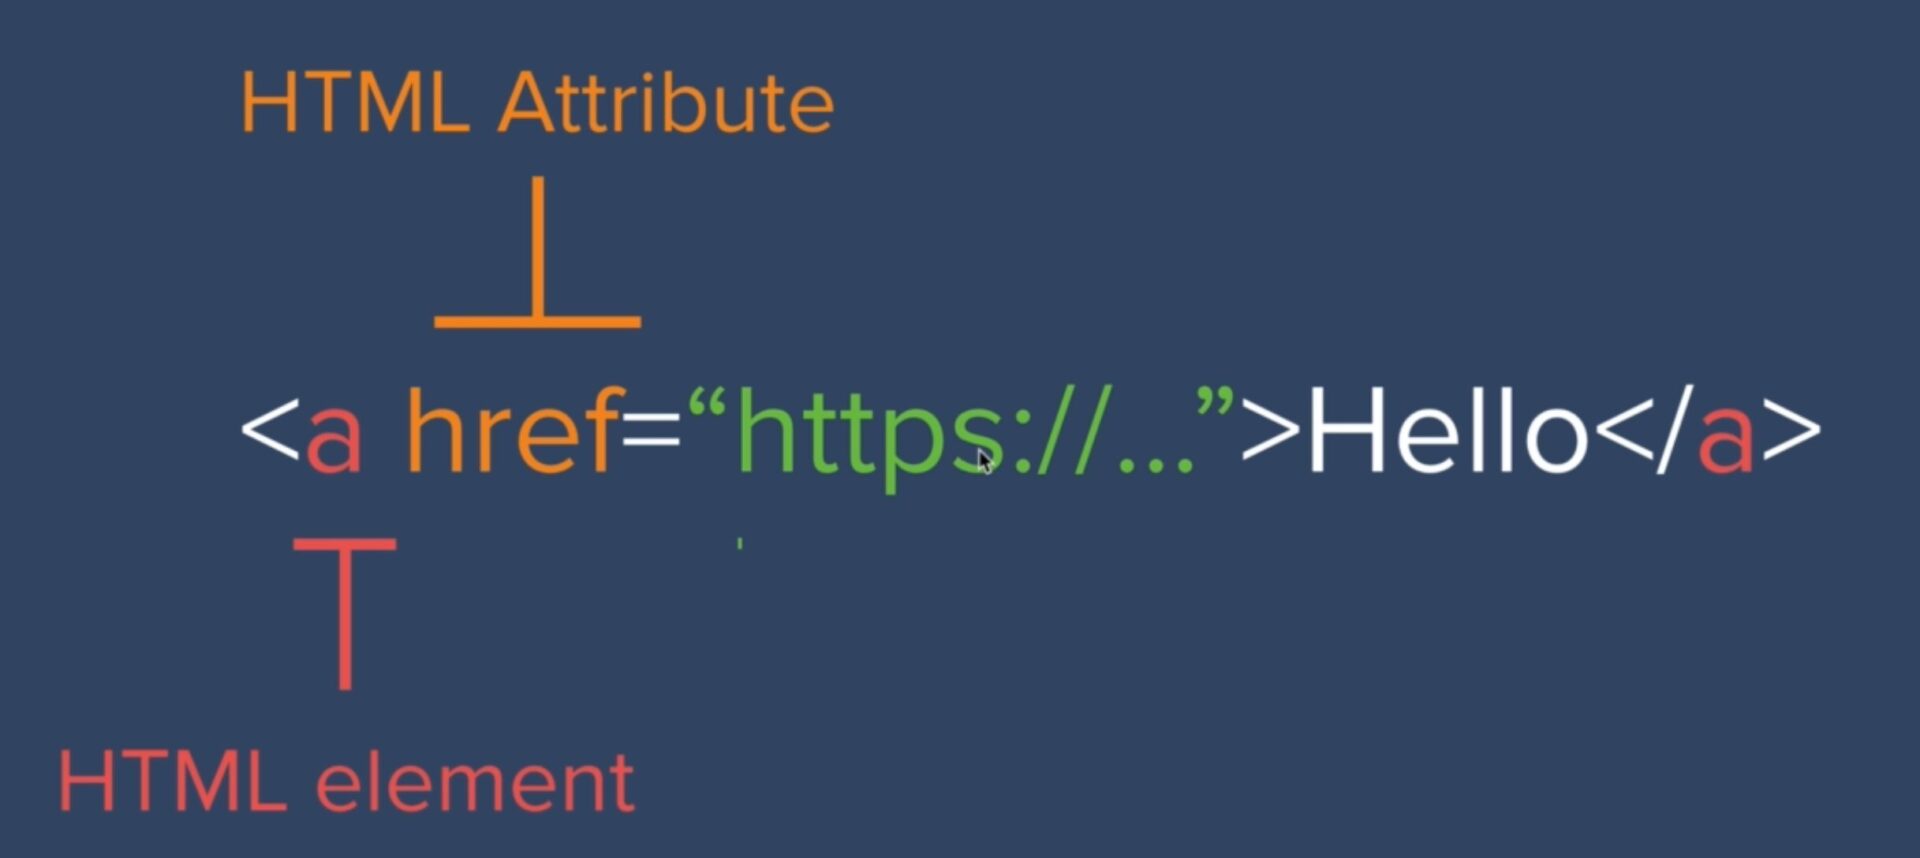 Internal link: the anchor tag attributes